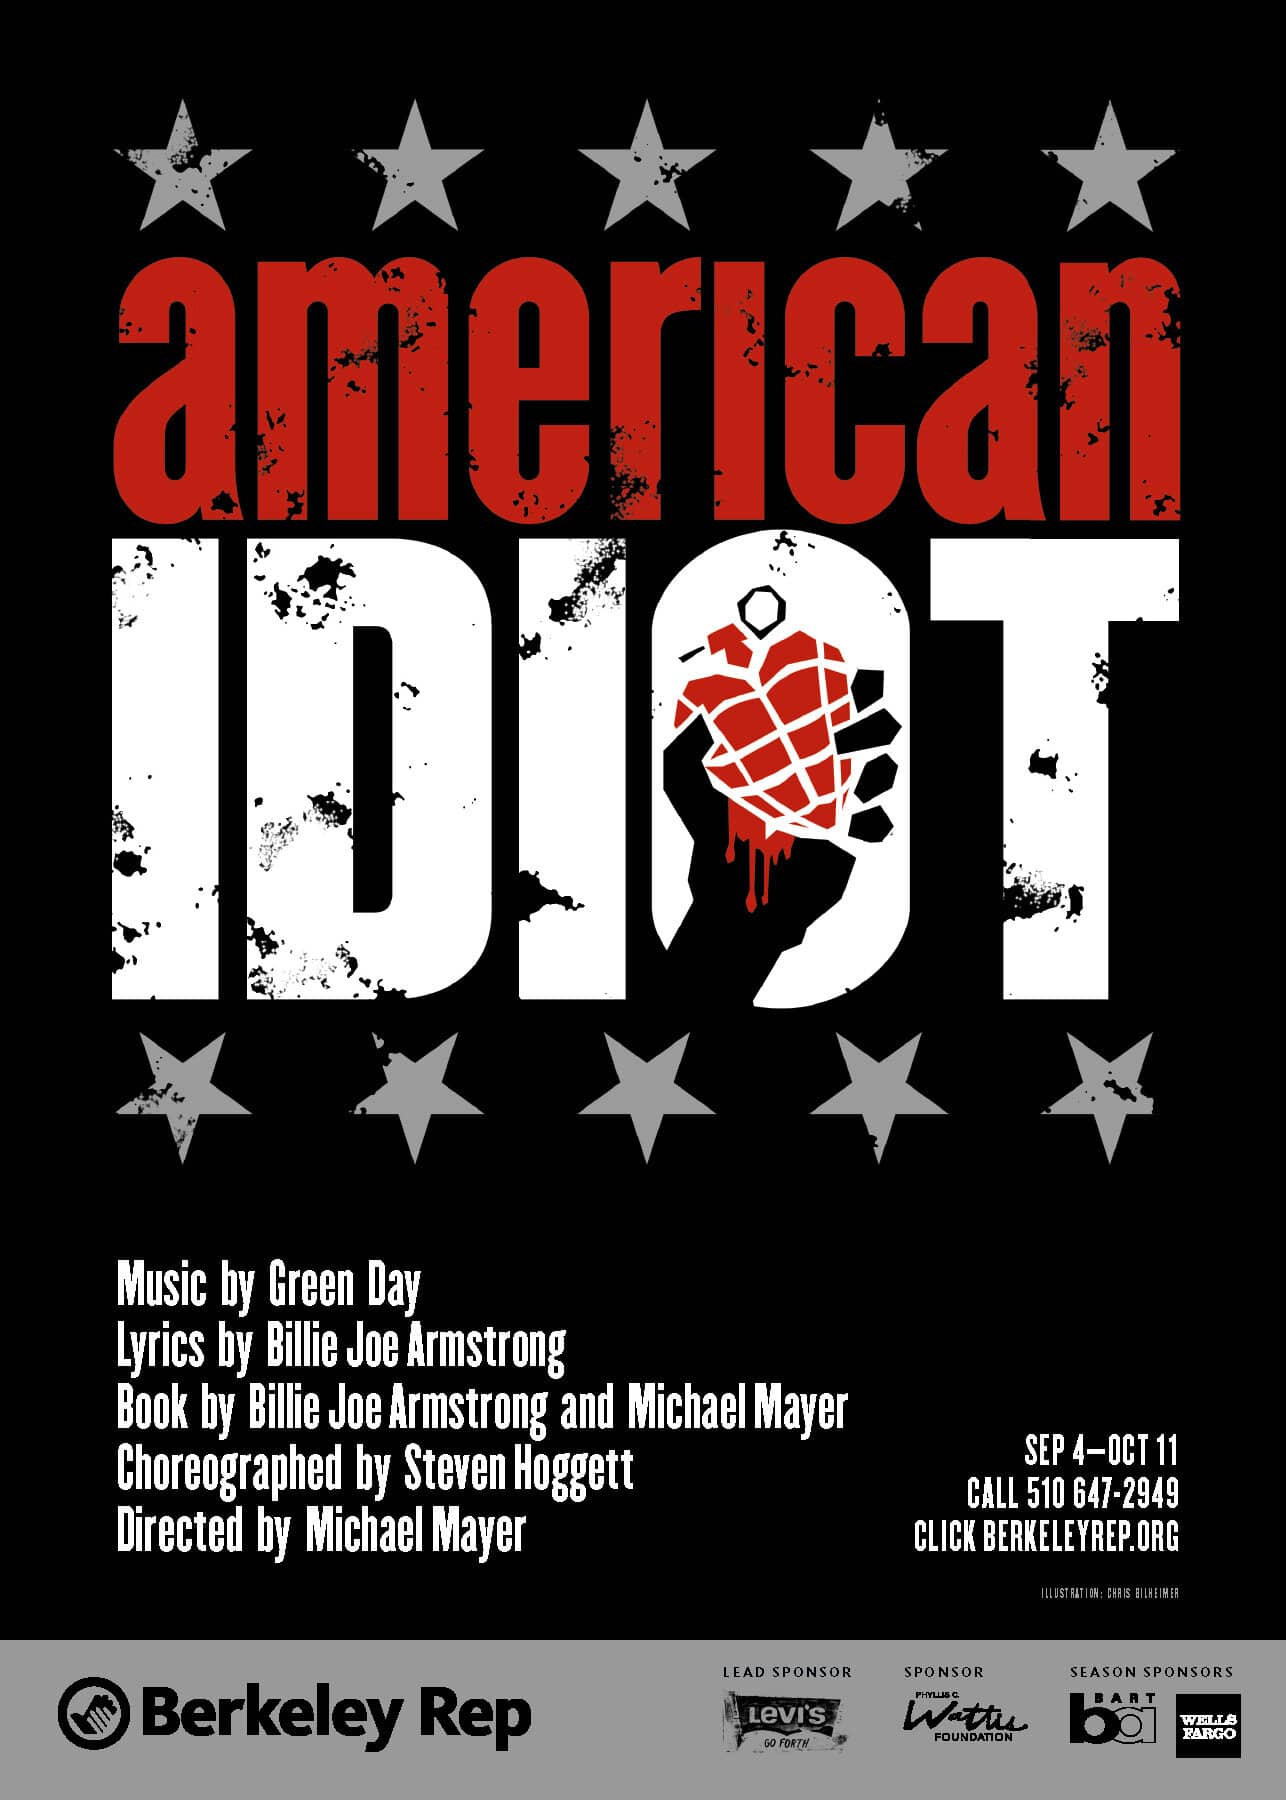 Poster for the stage adaptation of Green Day's "American Idiot," first at Berkeley Rep and later on Broadway. The image is a thoughtful remix of the original album art by Chris Bilheimer, including the iconic stencil-ish hand holding a hand grenade in the shape of a heart.